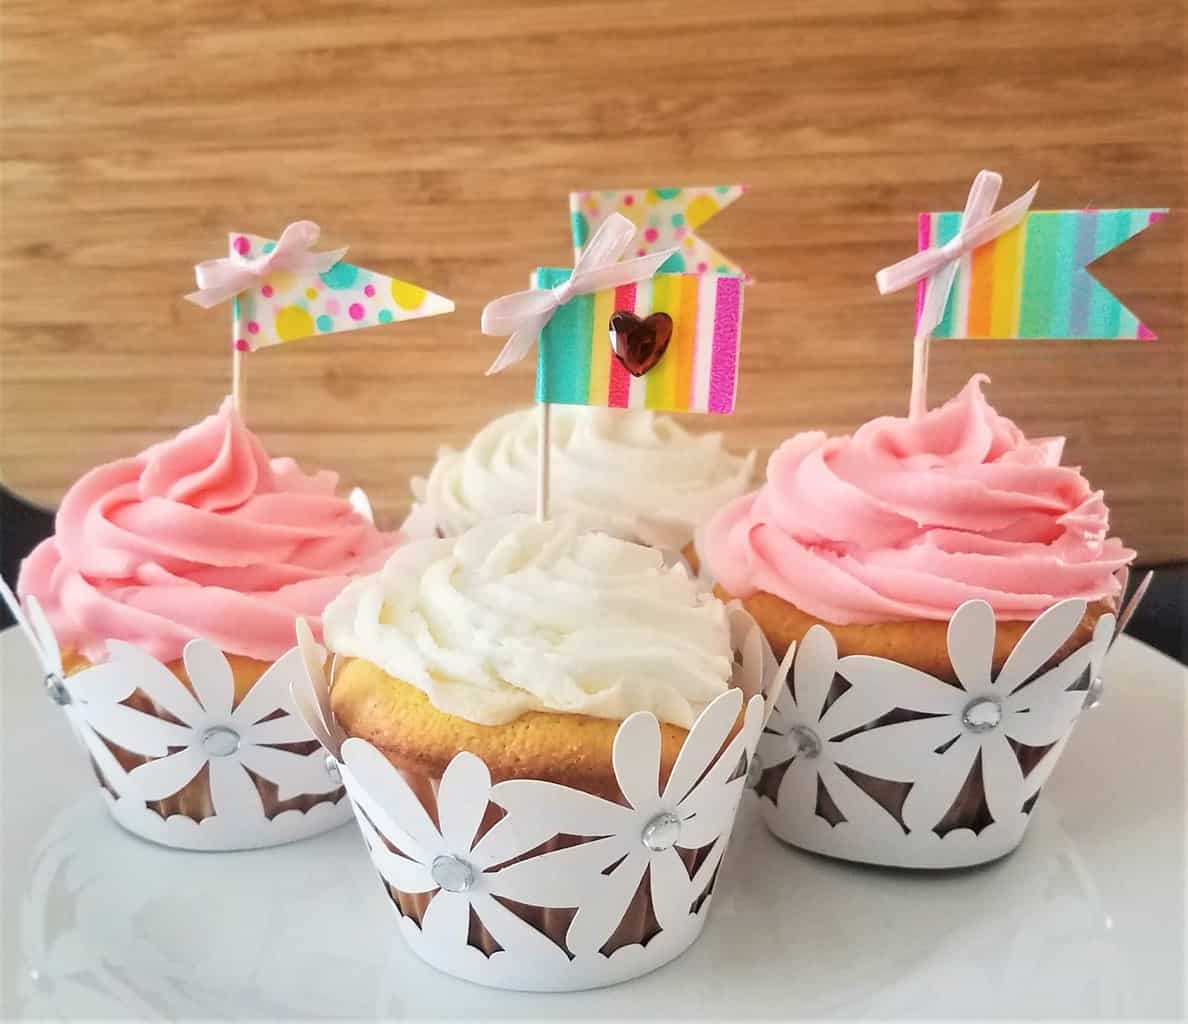 These washi tape cupcake toppers are an easy DIY cupcake decoration for kids to make and enjoy. They are perfect for birthday parties and only take a few minutes to make.